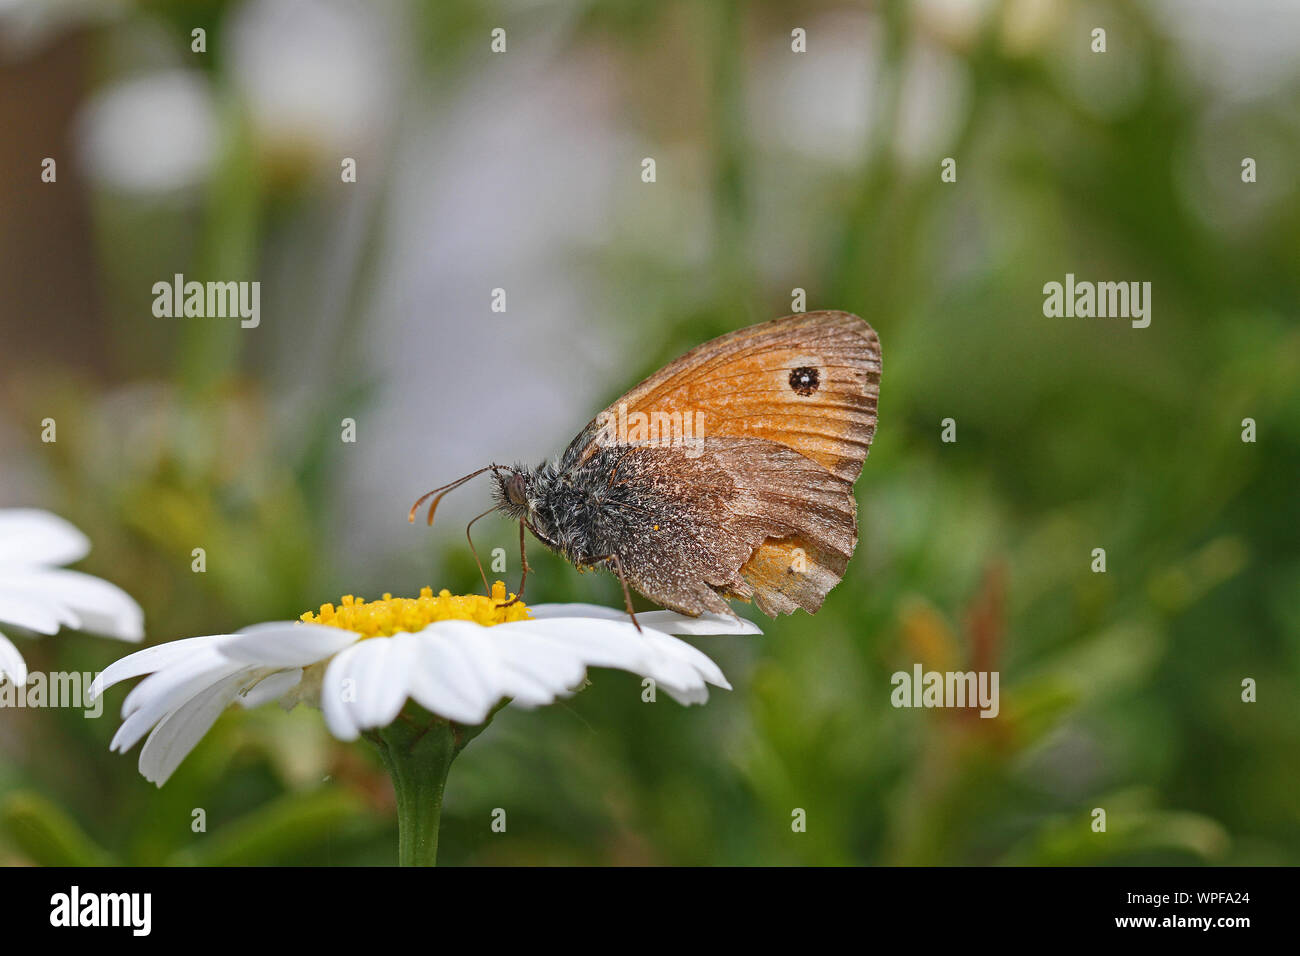 tiny small heath butterfly very close up Latin coenonympha pamphilus feeding on a marguerite or white swan river daisy Latin name brachyscome Stock Photo